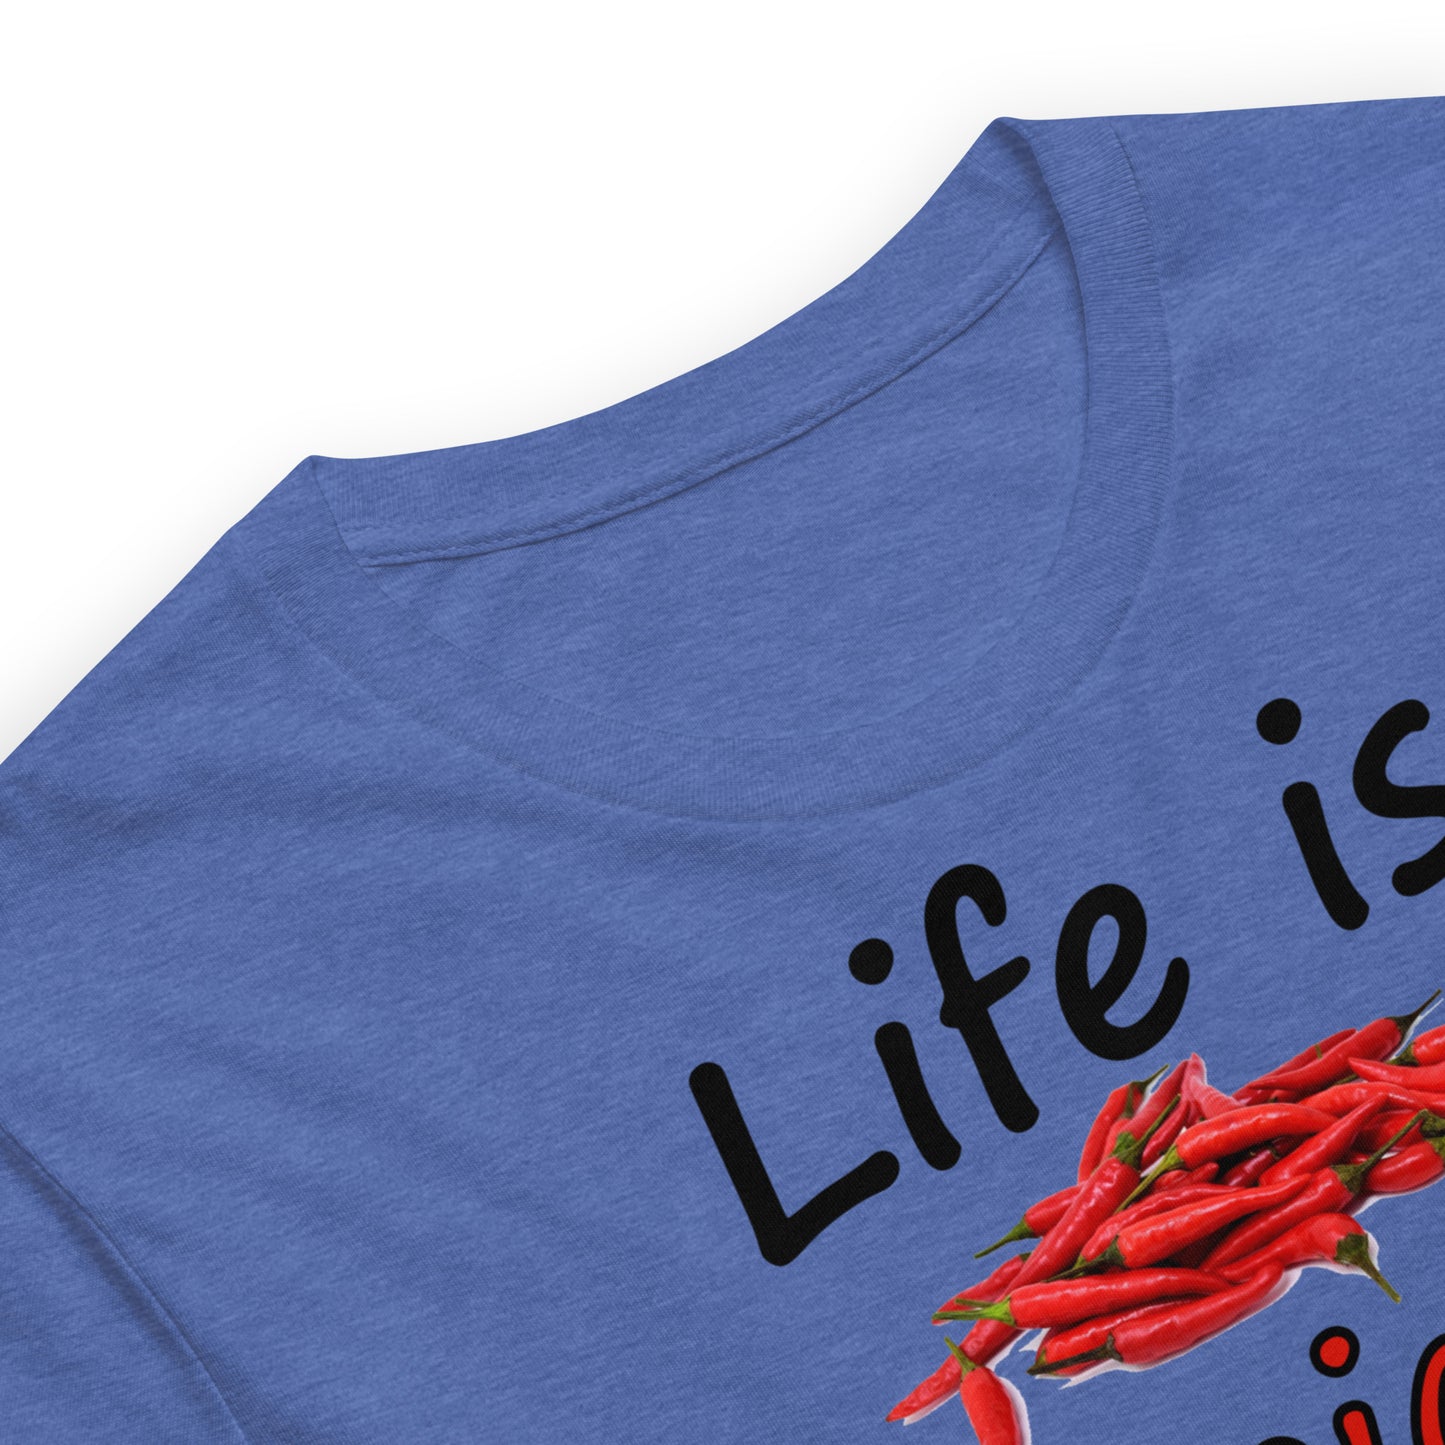 Heather true royal blue colored unisex t-shirt. Features text: Life is Spicy. Dill with it. Graphic of chili peppers and dill weed. Made of preshrunk cotton with side seams. Detail view of neckline.